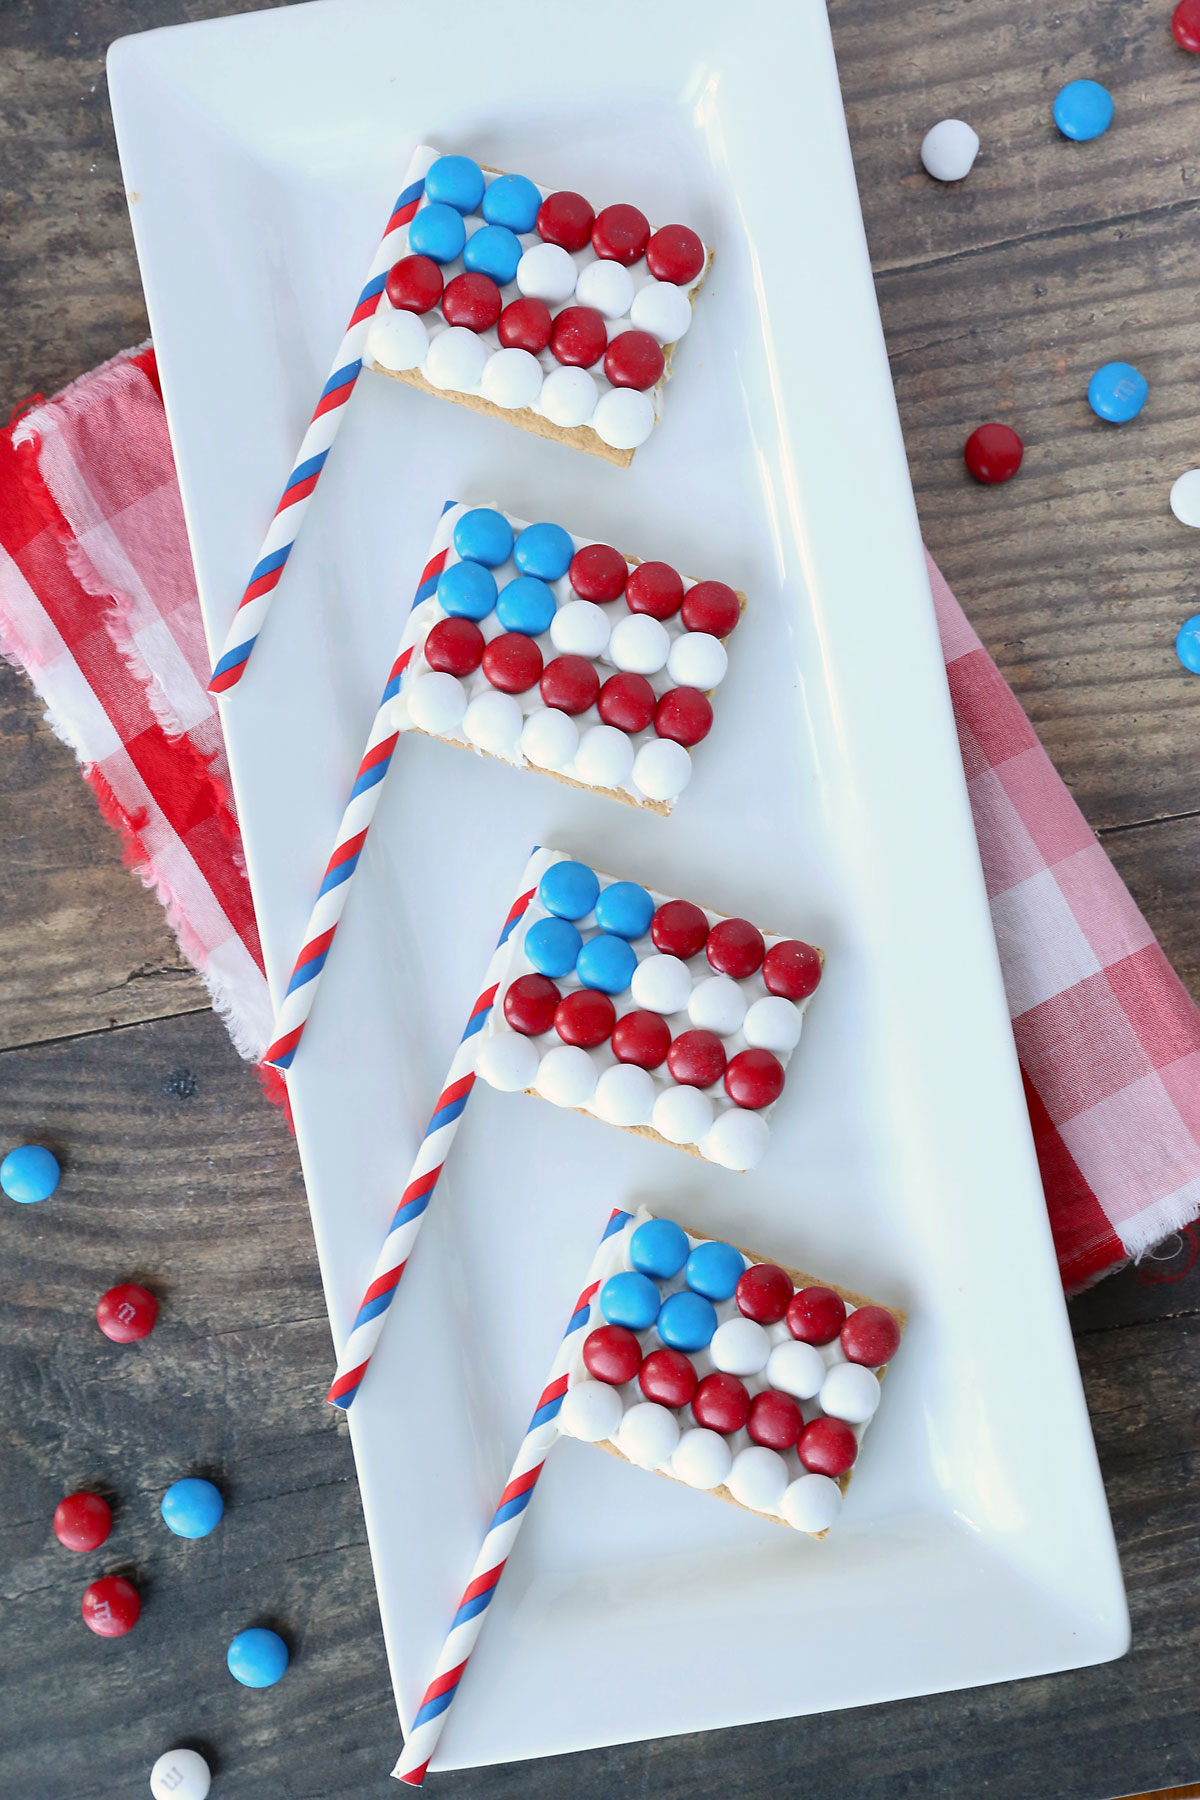 Graham crackers decorated to look like the American flag, with red, white and blue M&Ms on top